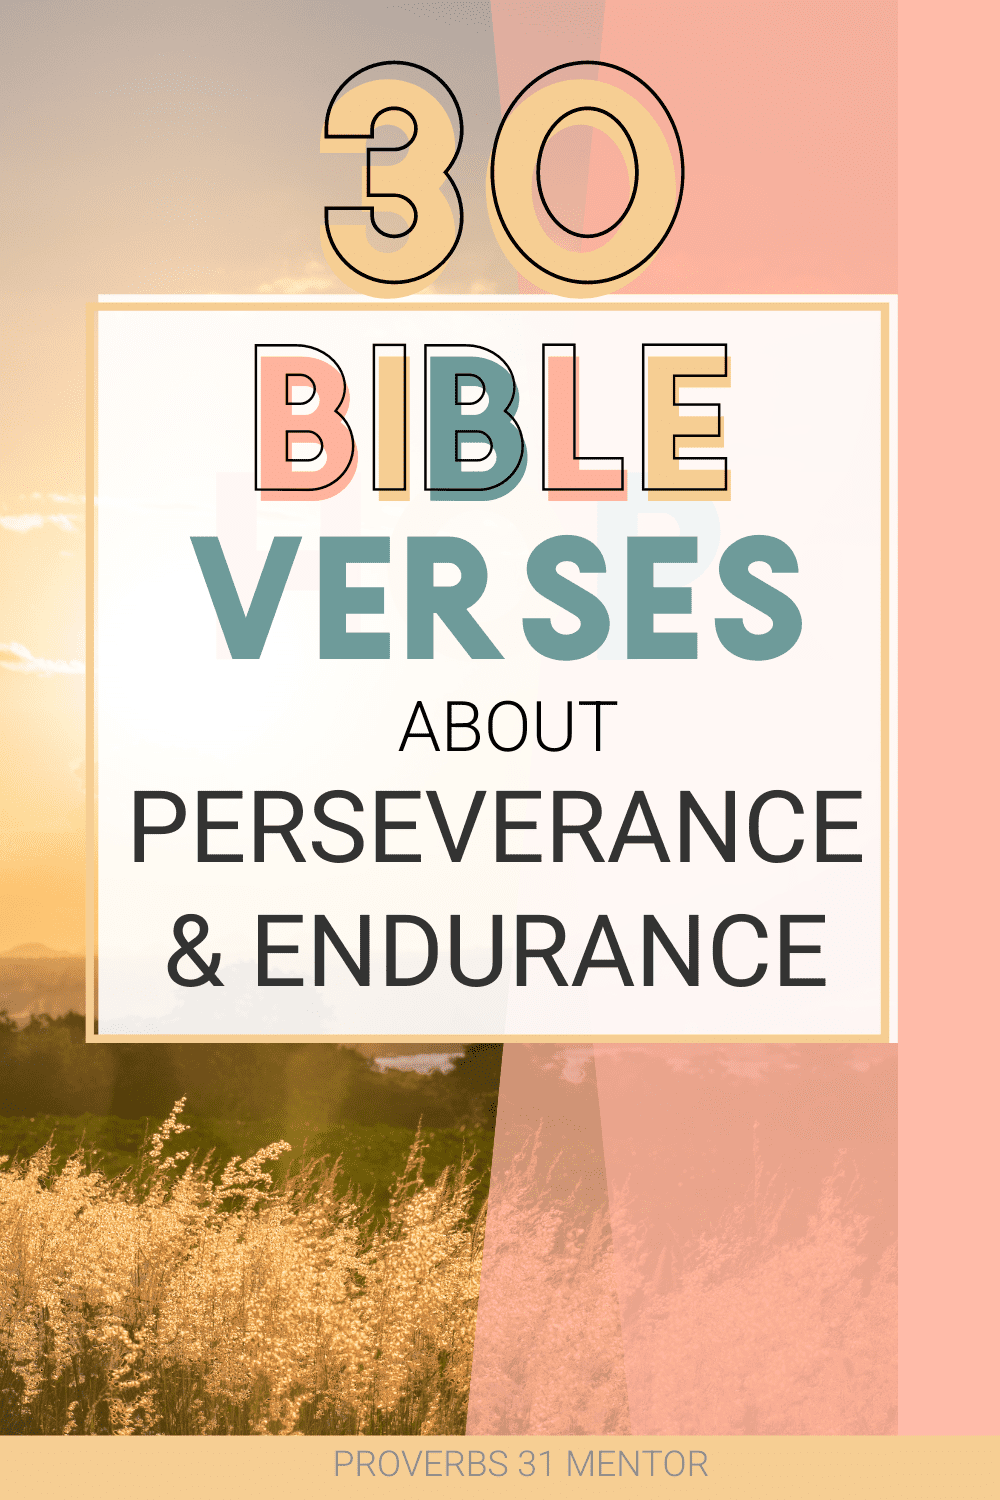 Title: 30 Bible verses about perseverance and and endurance picture- sunrise in a field of grain